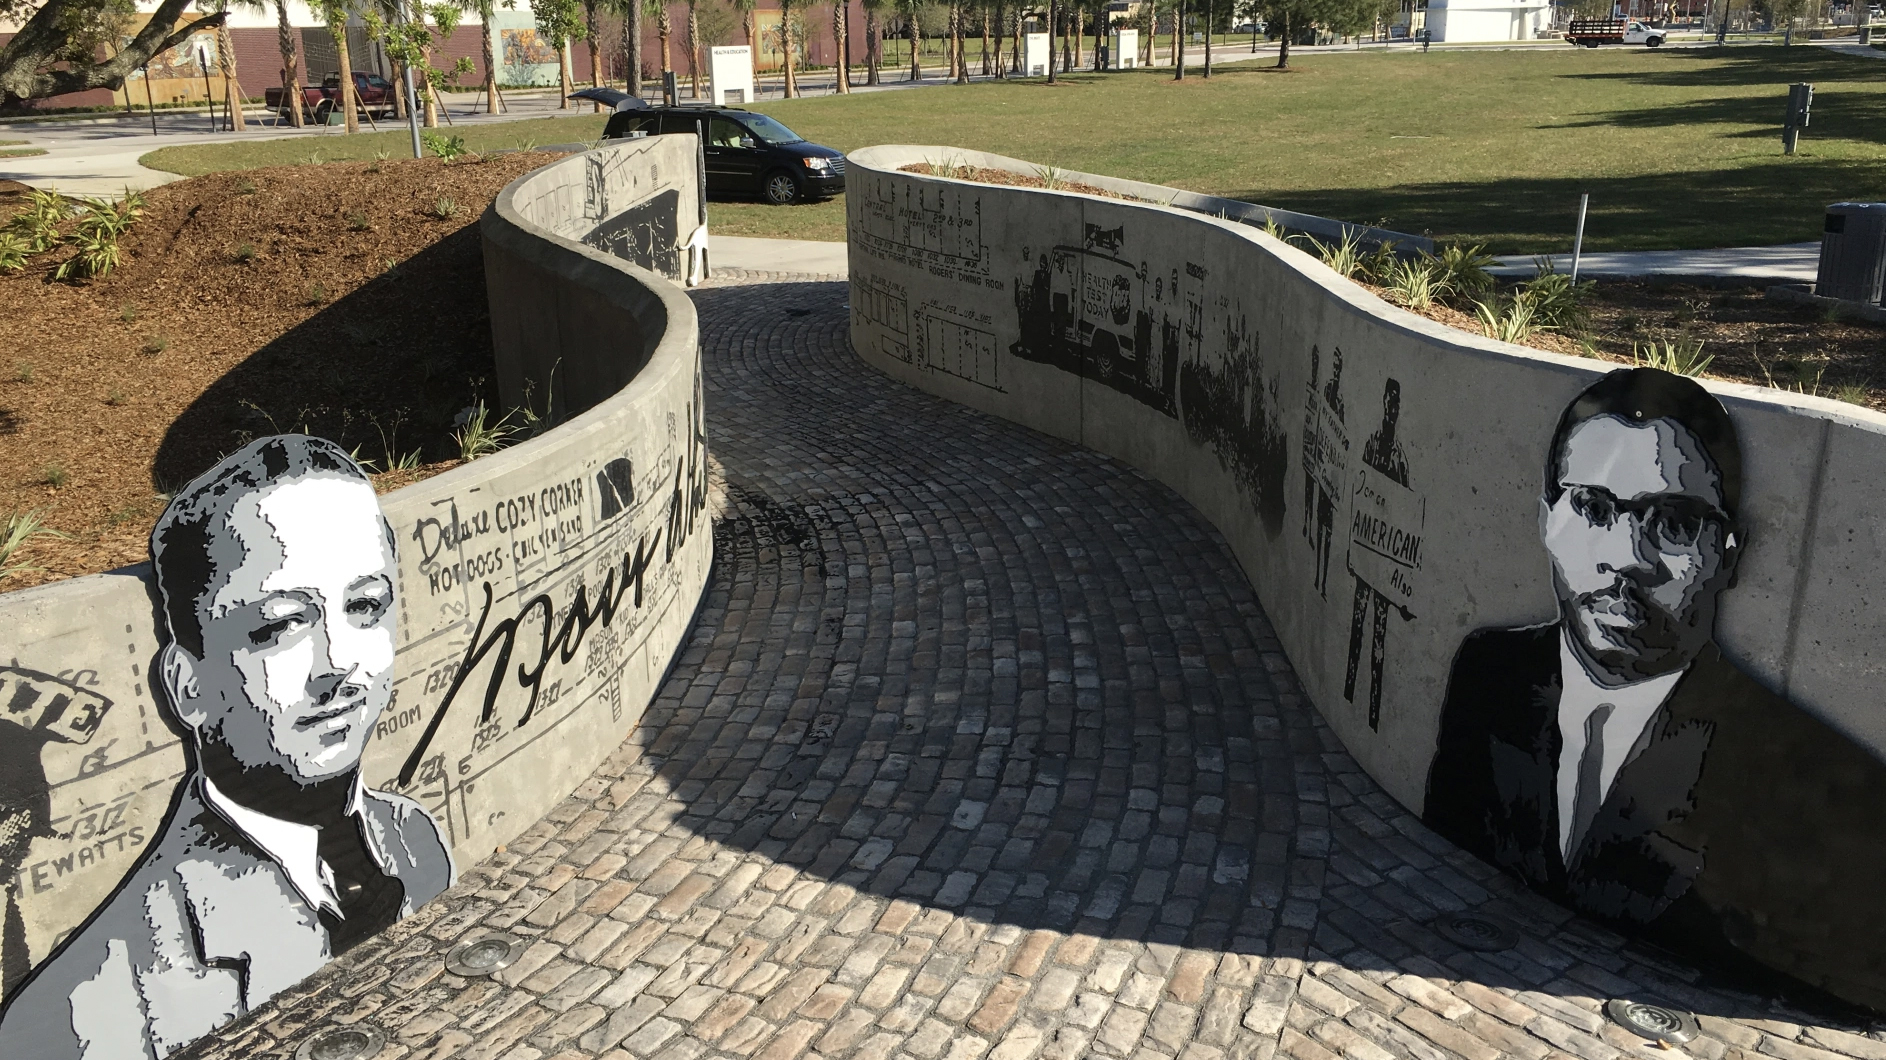 86 Foot Social Justice Wall in Tamarac Will Reflect the 'Spirit of the Community'